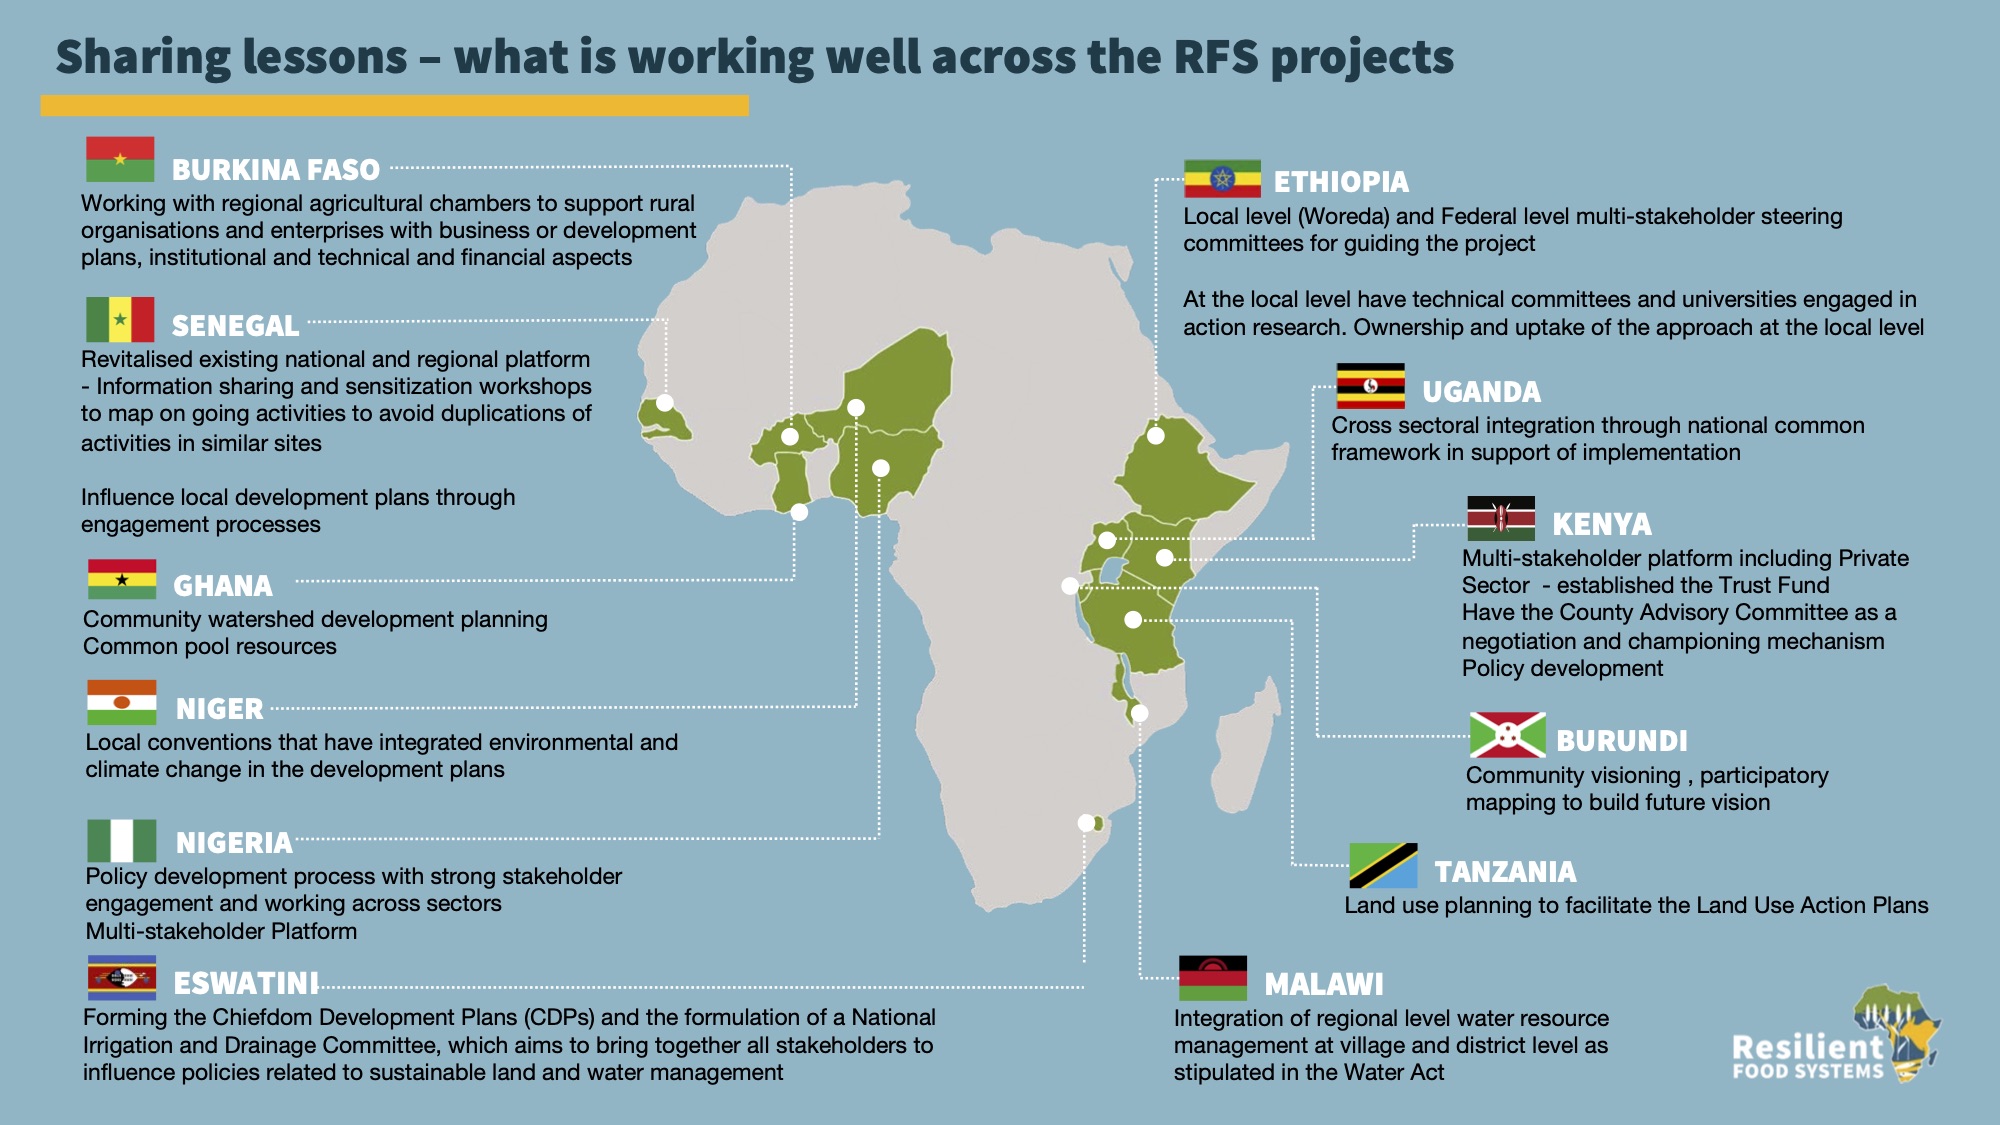 The webinars gave each RFS country project team an opportunity to share their experiences in developing institutional capacity and enhancing evidence-based decision-making within their project.